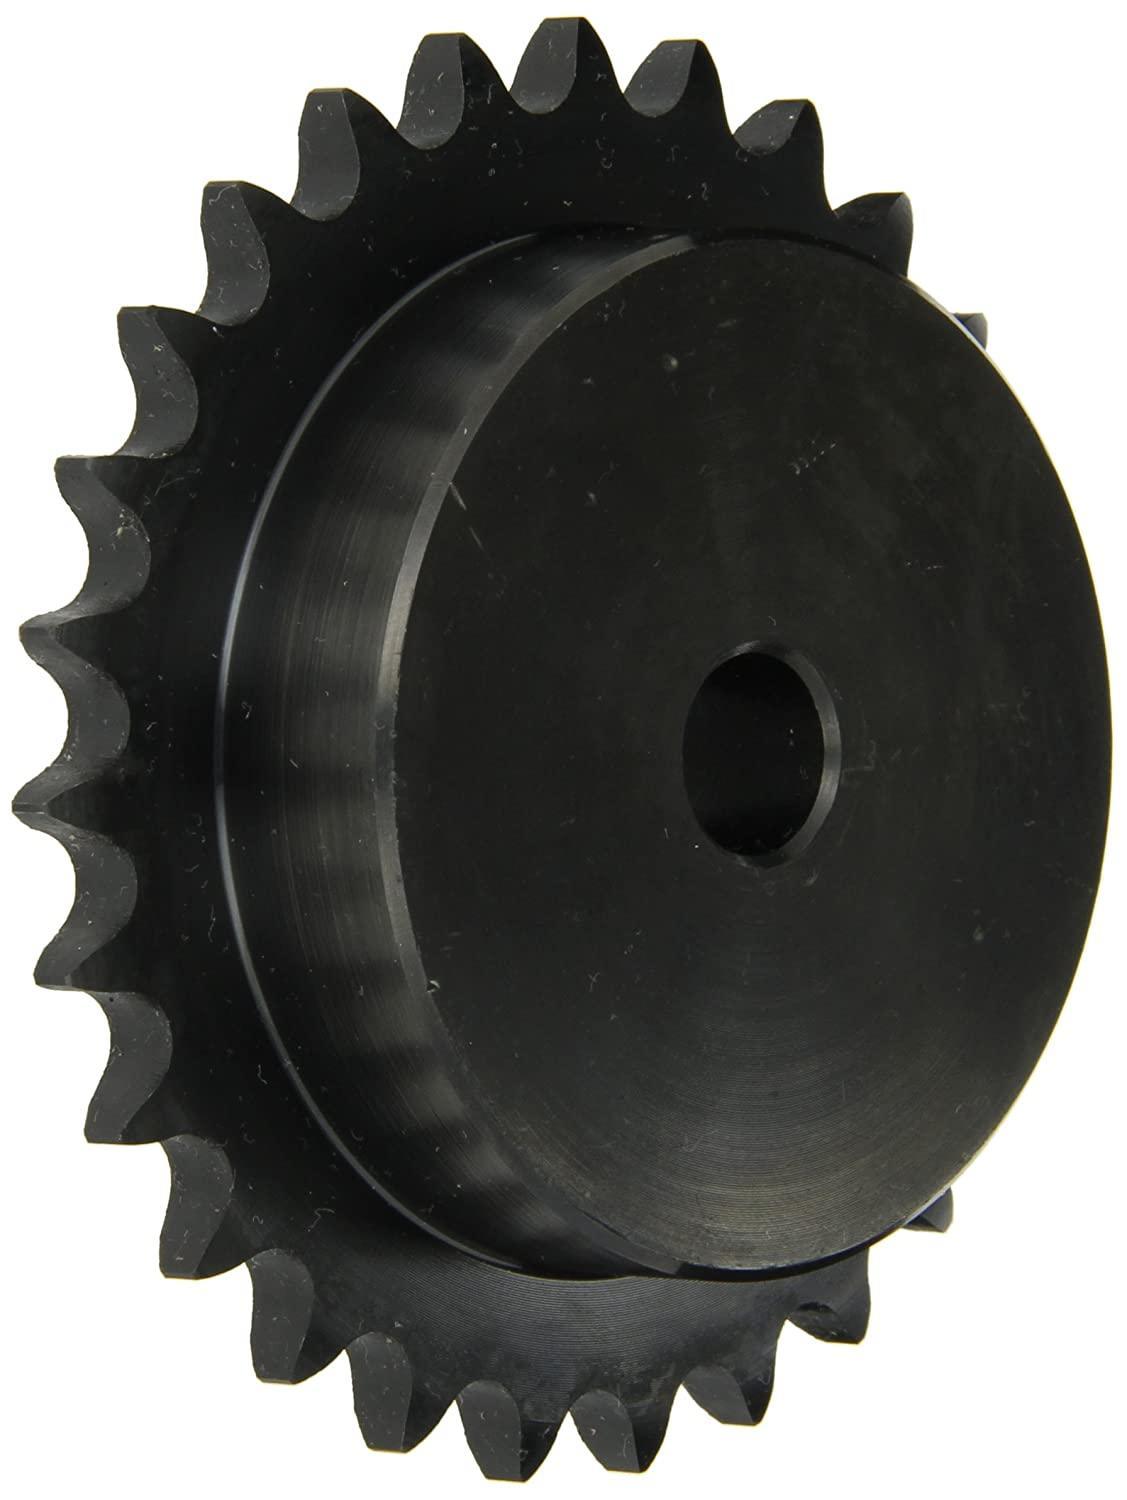 25B32 Roller Chain Sprocket With Stock Bore - Forces Inc